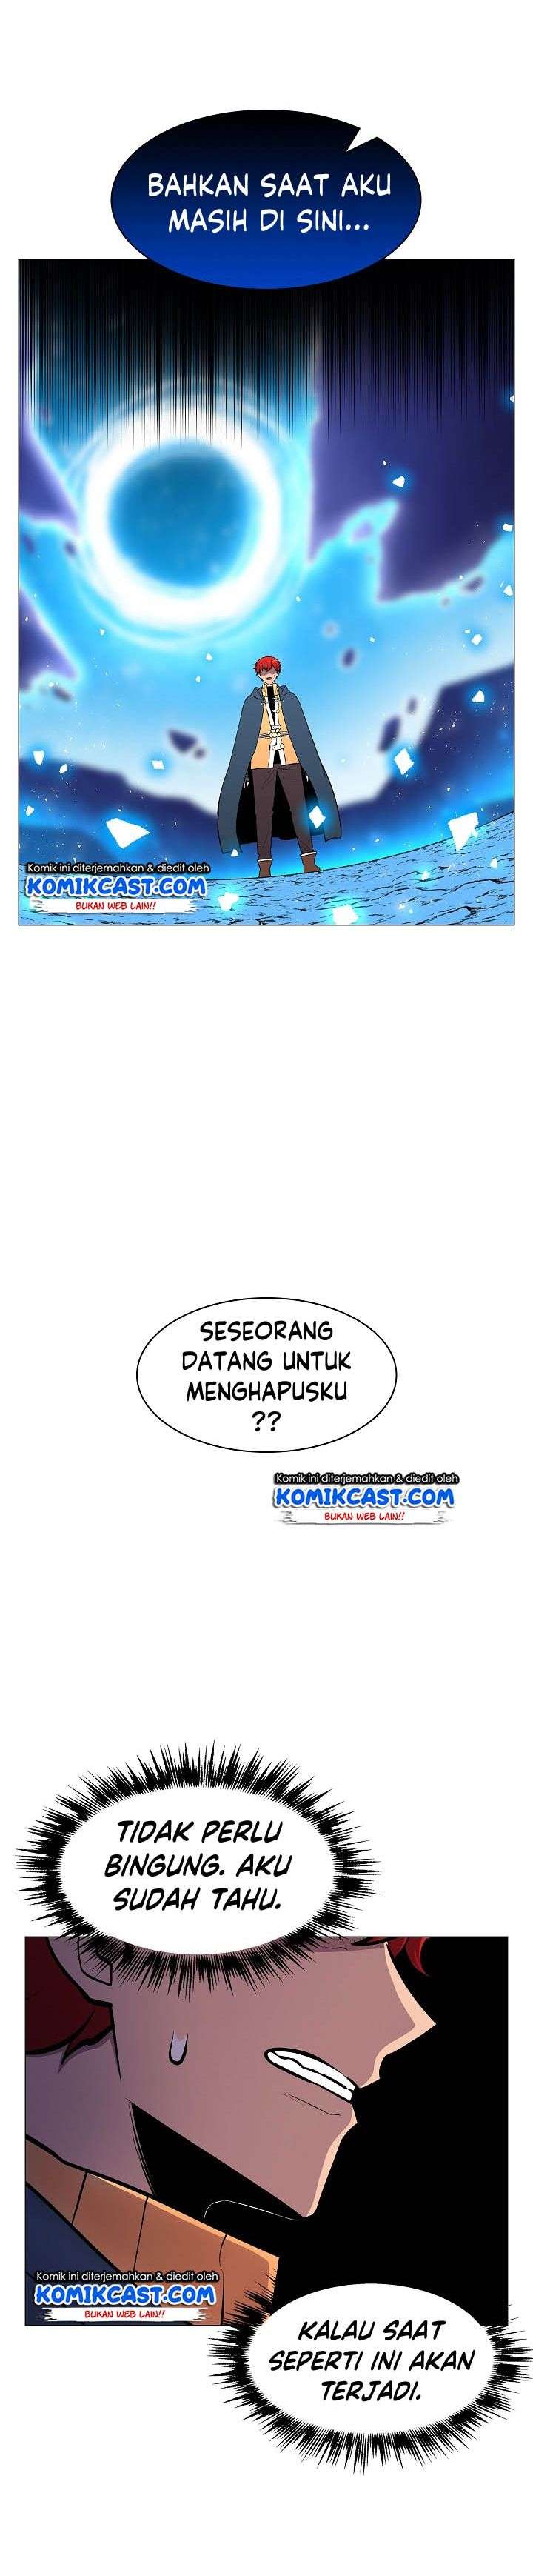 Updater Chapter 11